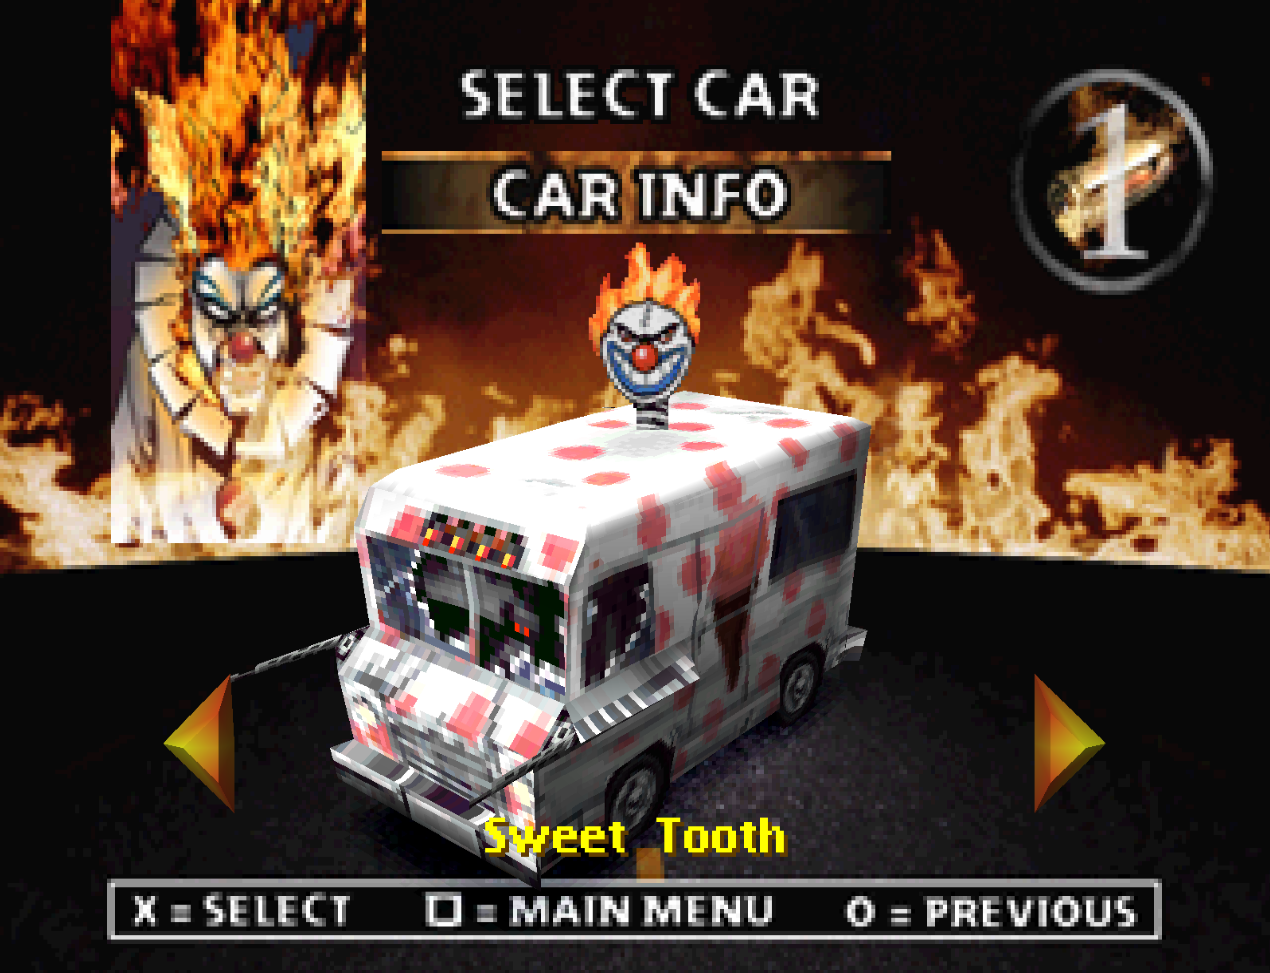 All the twisted metal games except small brawl. Which ones your favorite? :  r/TwistedMetal